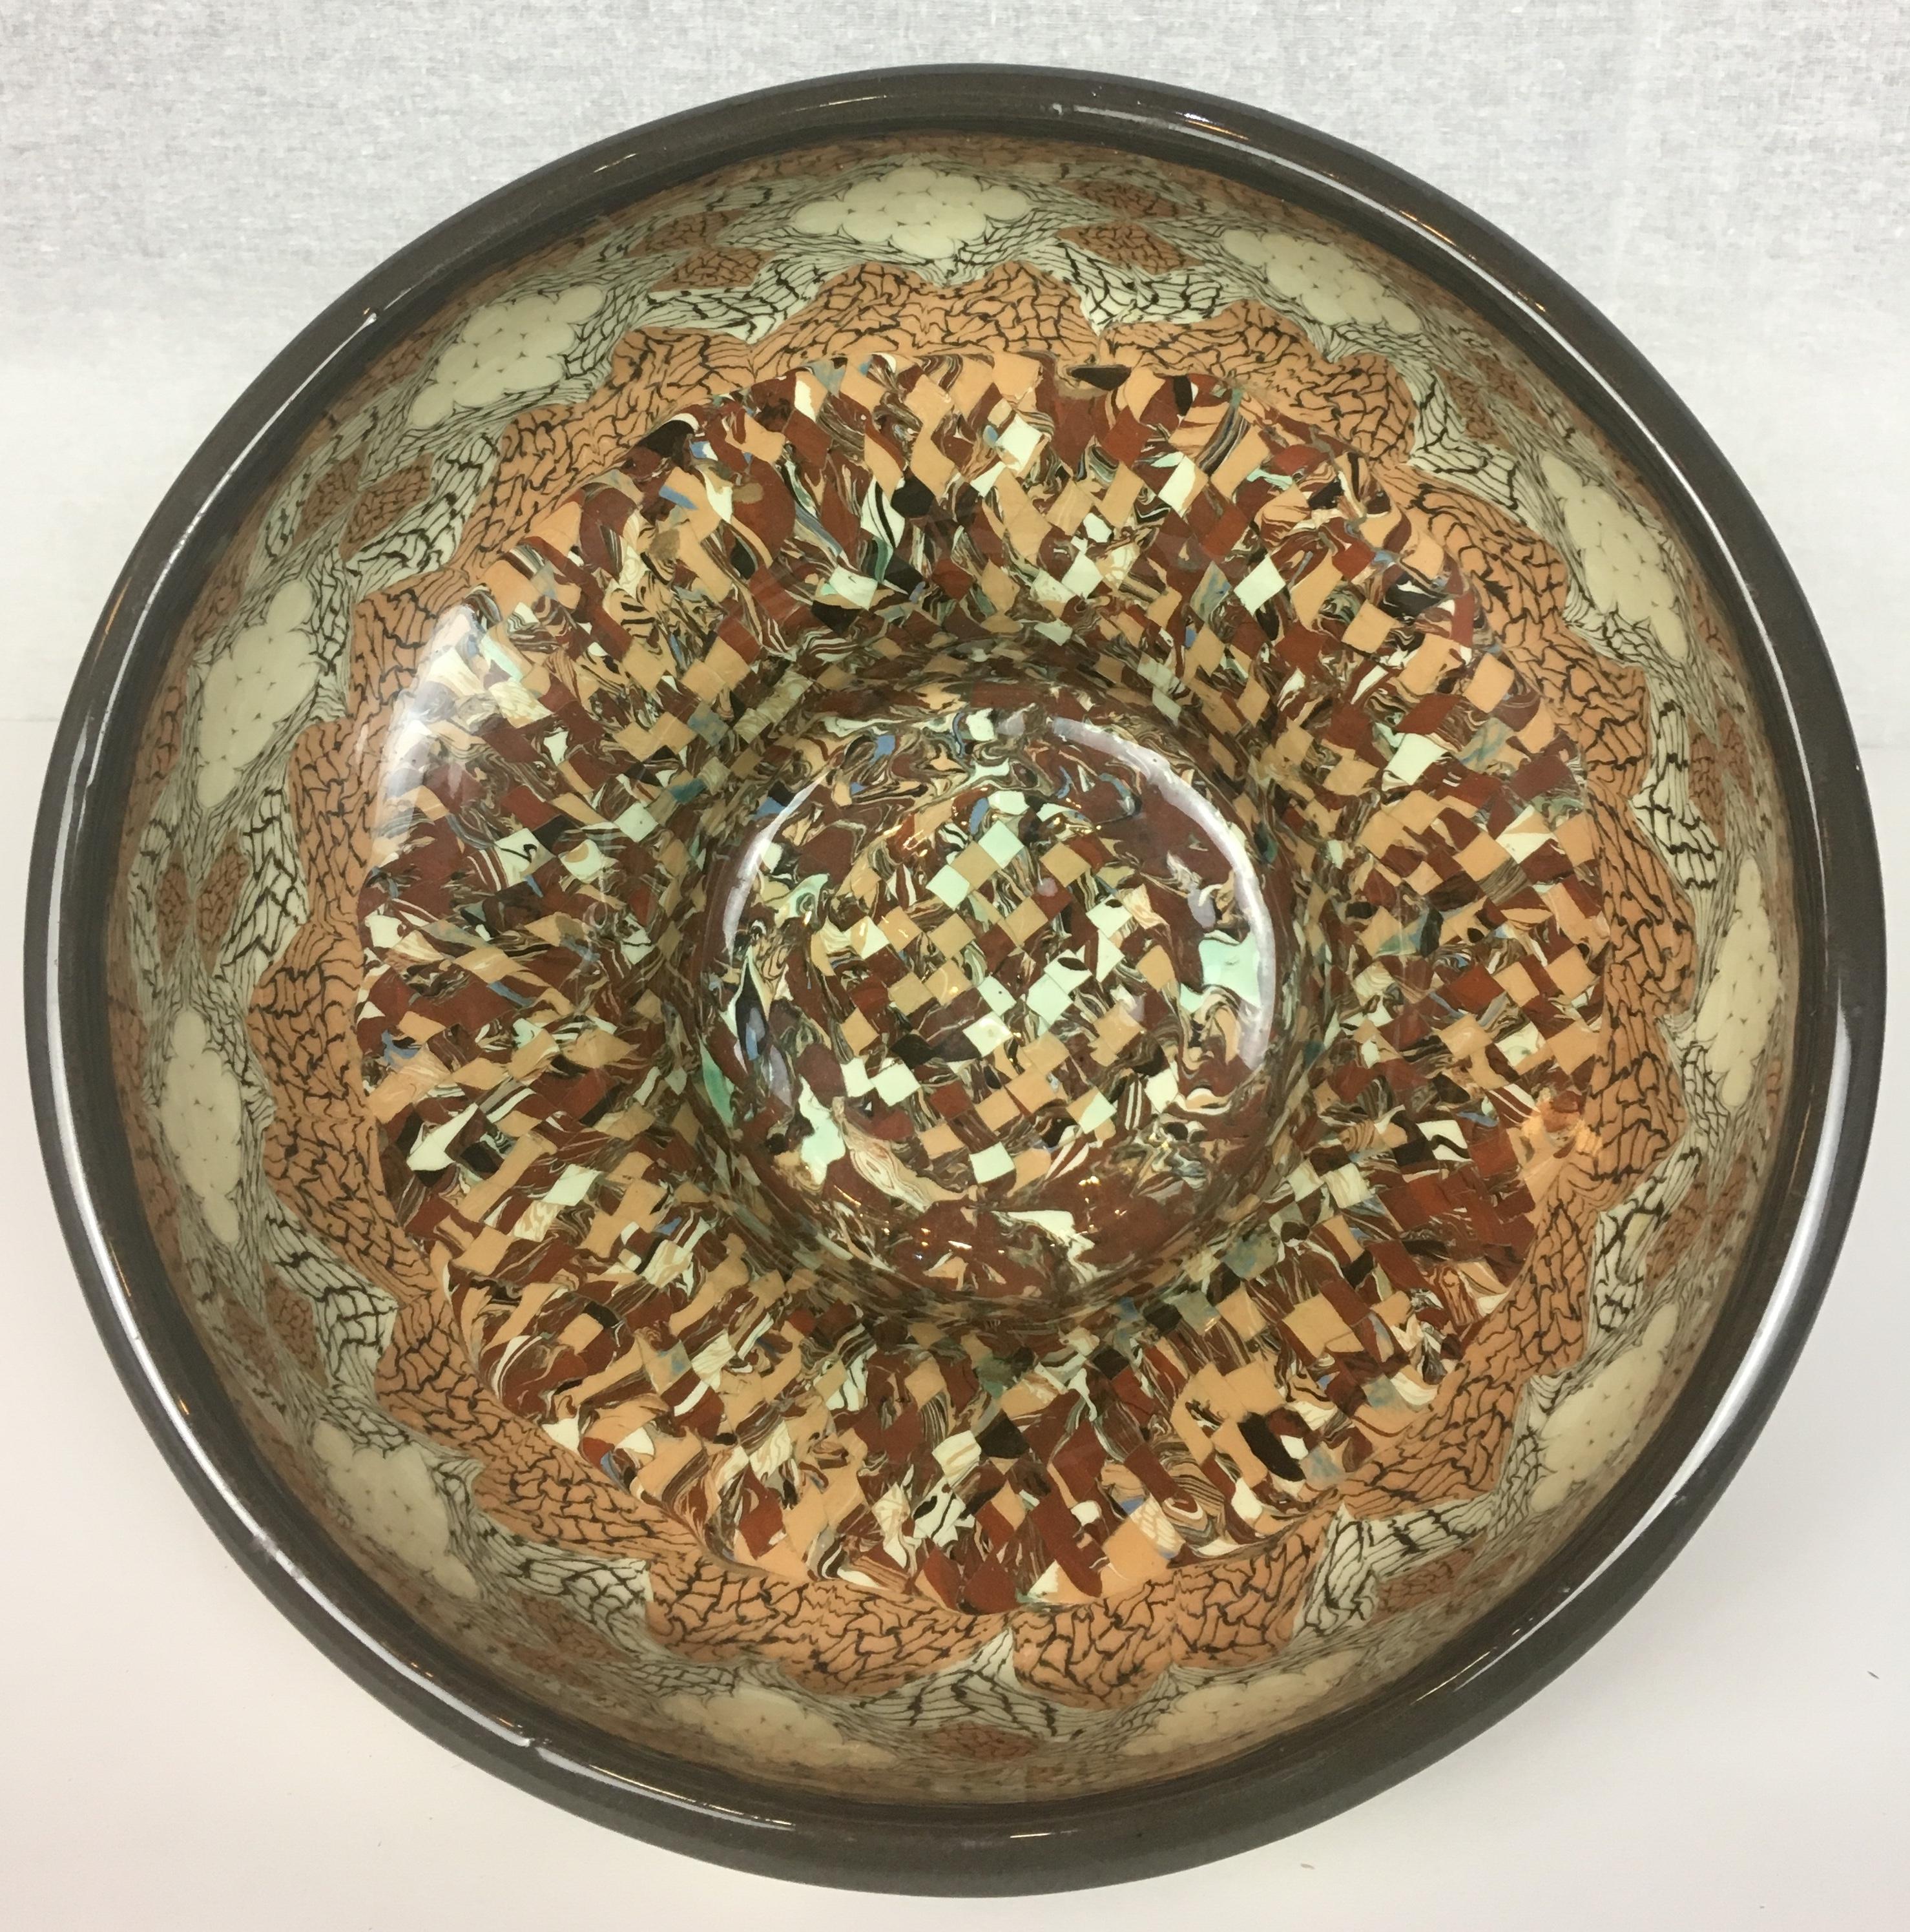 Jean Gerbino (1876-1966) mosaique ceramic bowl
Art pottery 
Vallauris, France, early 20th century. 

The body of this beautiful bowl with multicolored 